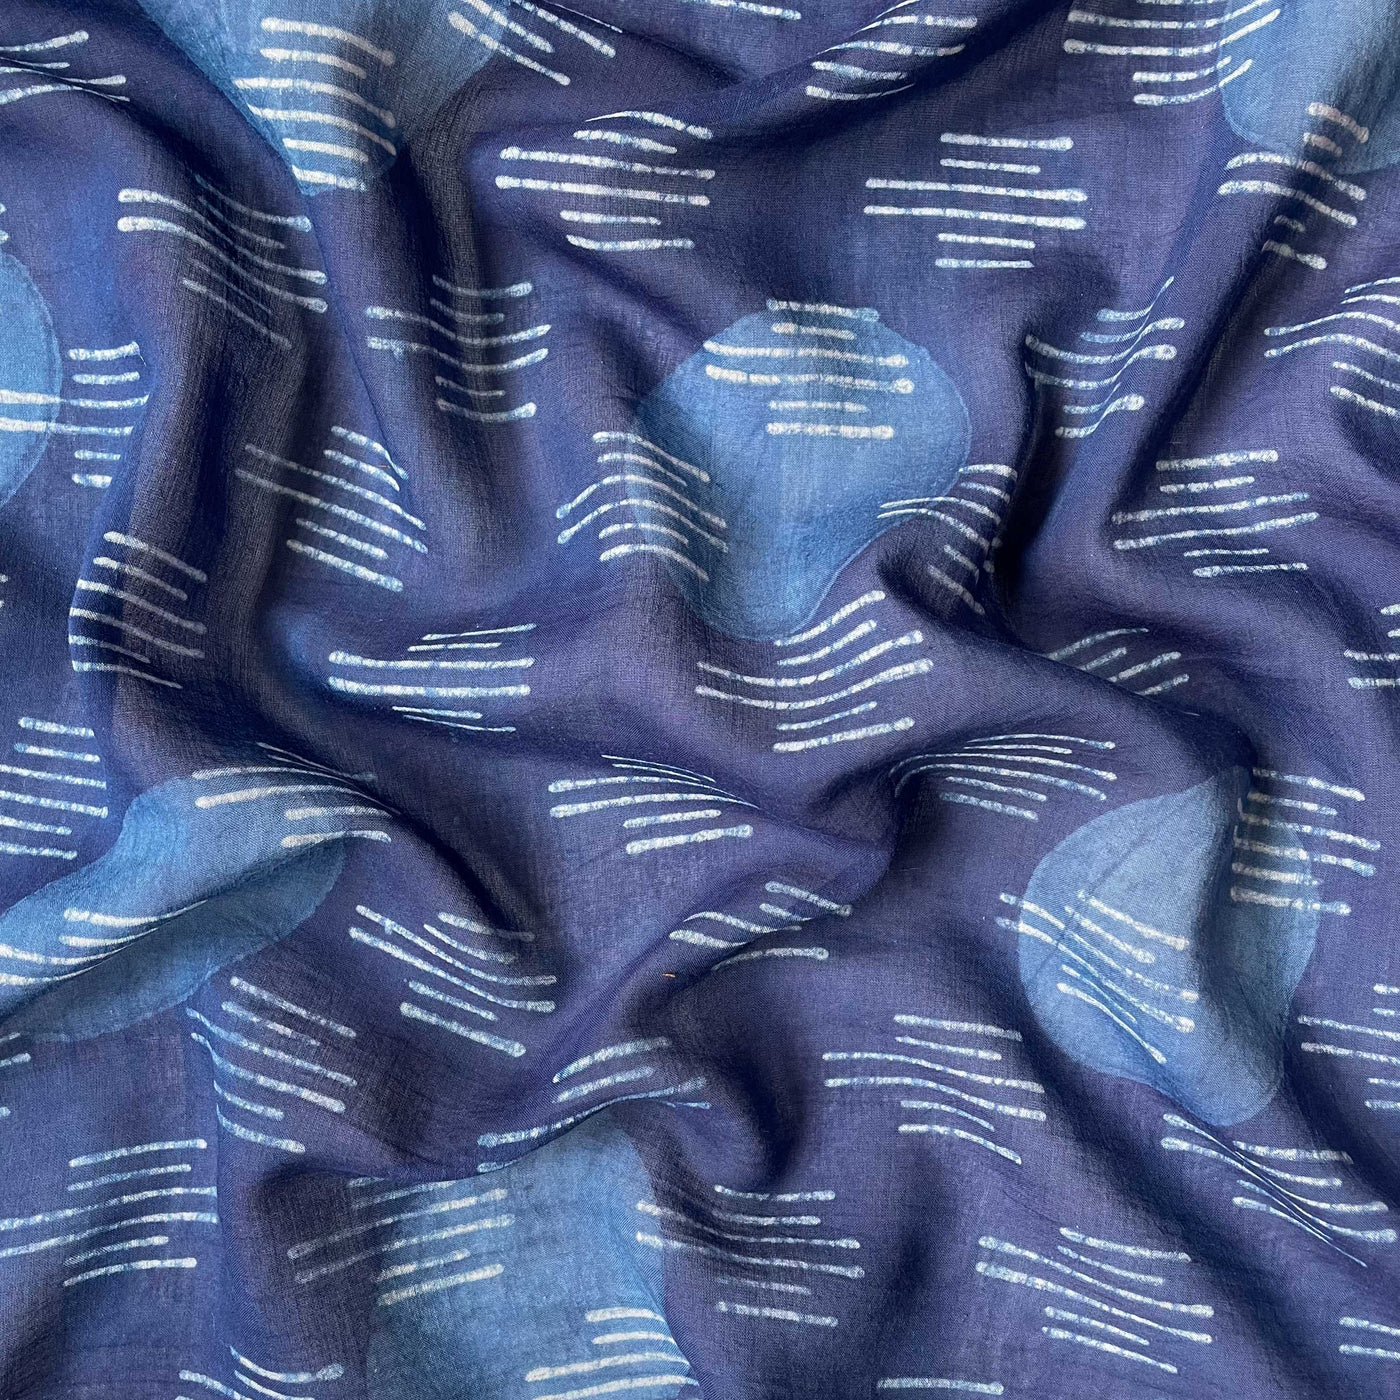 Hand Block Printed Cotton Fabric Fabric Indigo Dabu Natural Dyed Polkas & Stripes Hand Block Printed Pure Cotton Fabric (Width 60 Inches)